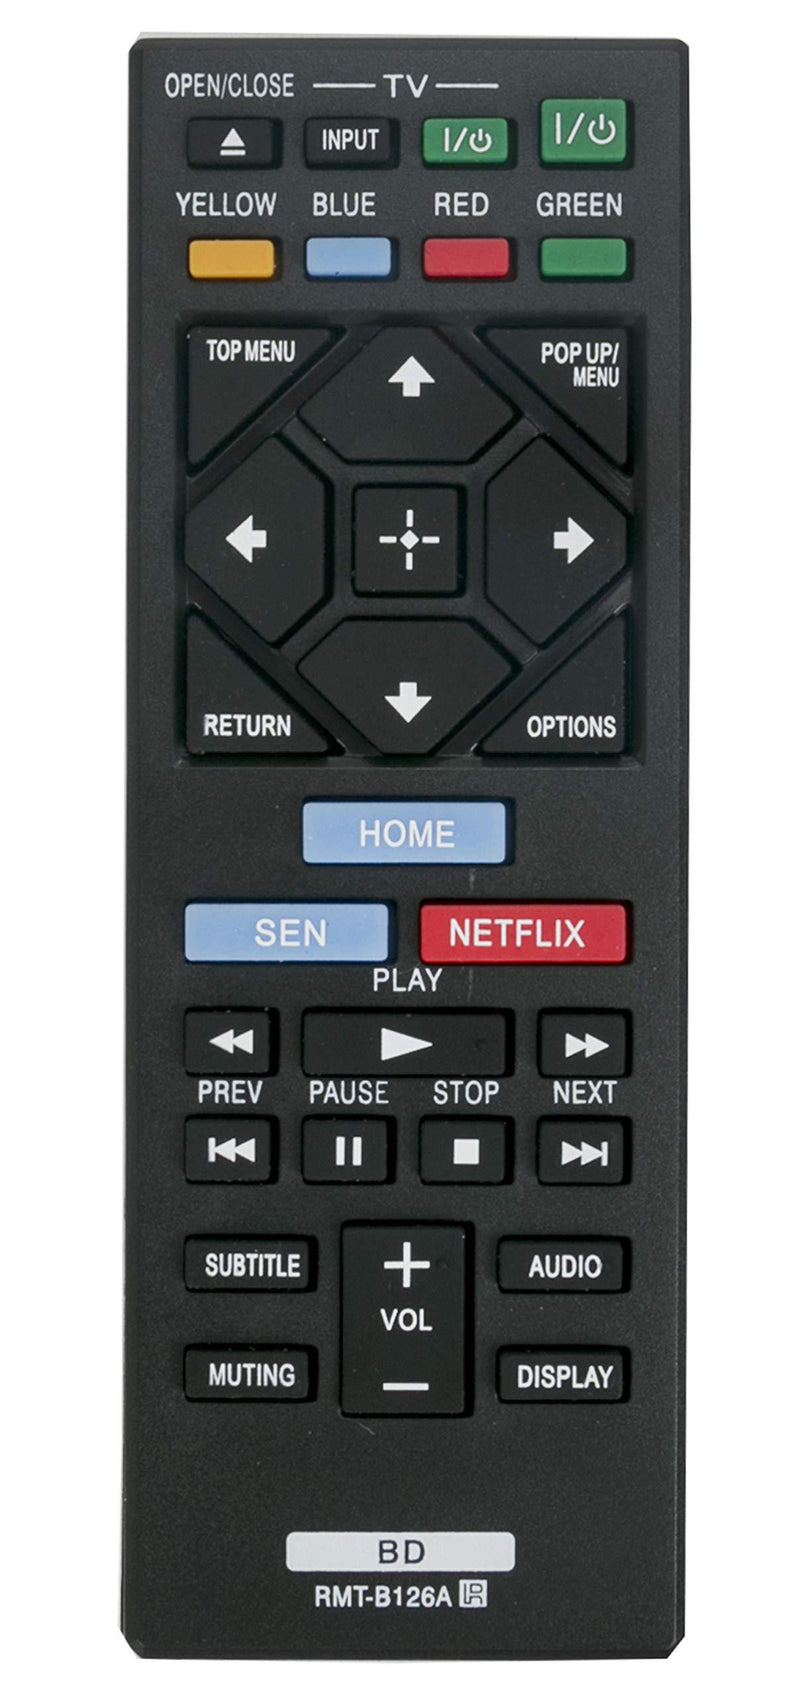 VINABTY New RMT-B126A Replaced BluRay Disc DVD Player Remote fit for Sony BDPBX620 BDP-S1200 BDPS1200 BDP-S2200 BDP-S5200 BDPS5200 BDP-S5200/D BDPS5200D BDPS6200 BDP-S6200 BDPS2200 1-492-678-11 - LeoForward Australia